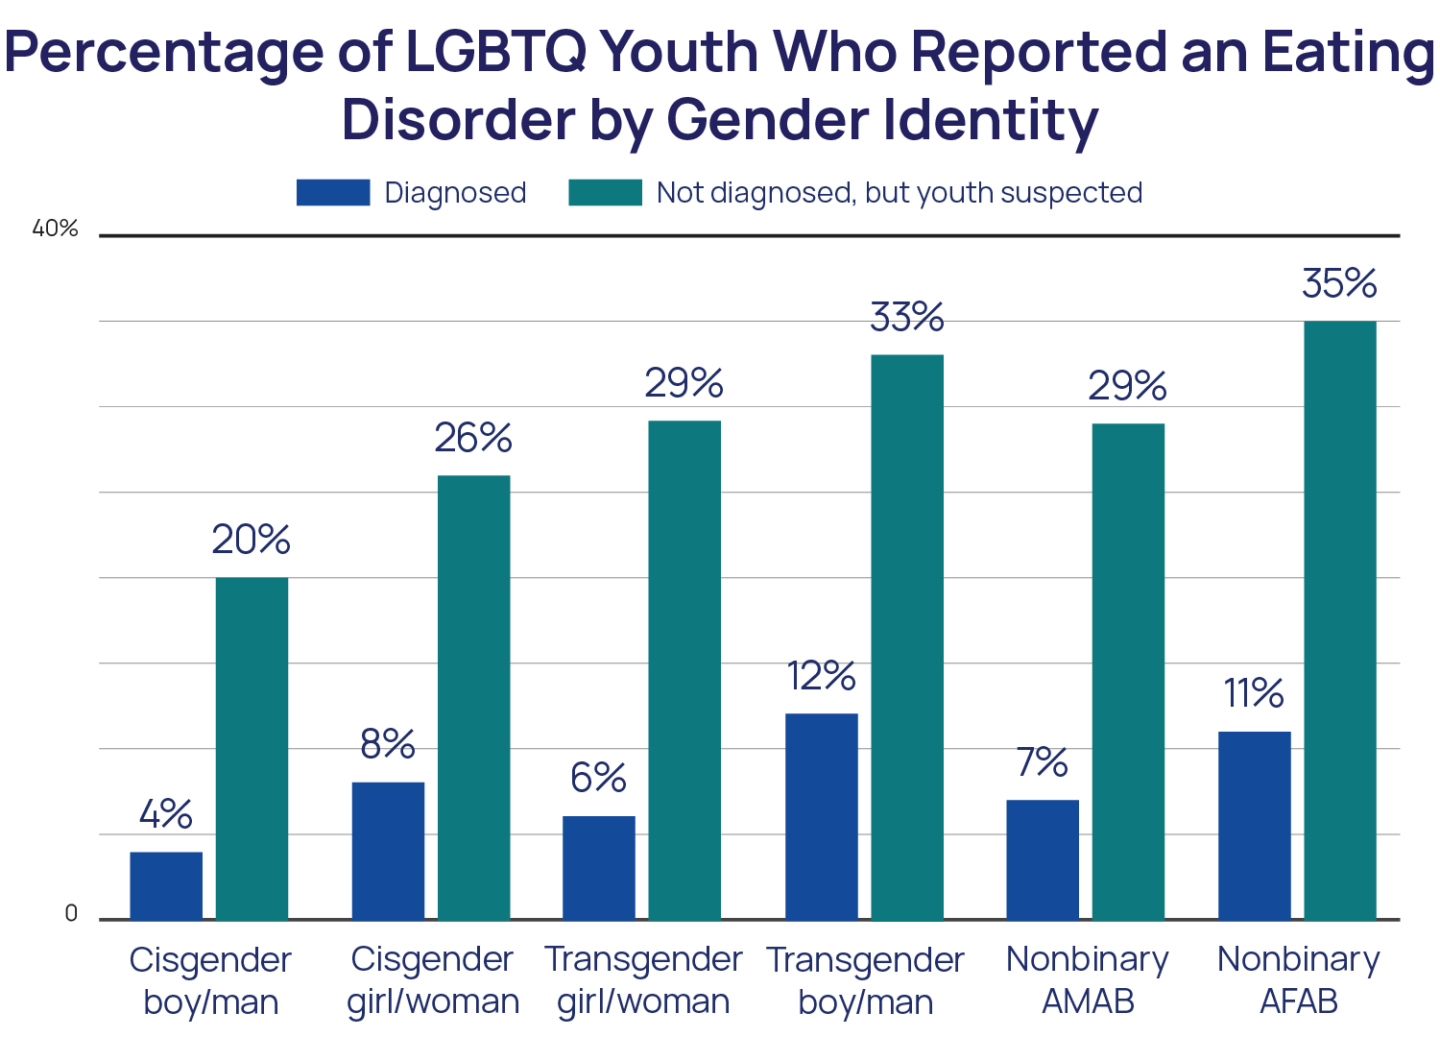 Percentage of LGBTQ Youth who reported an eating disorder by Gender Identity